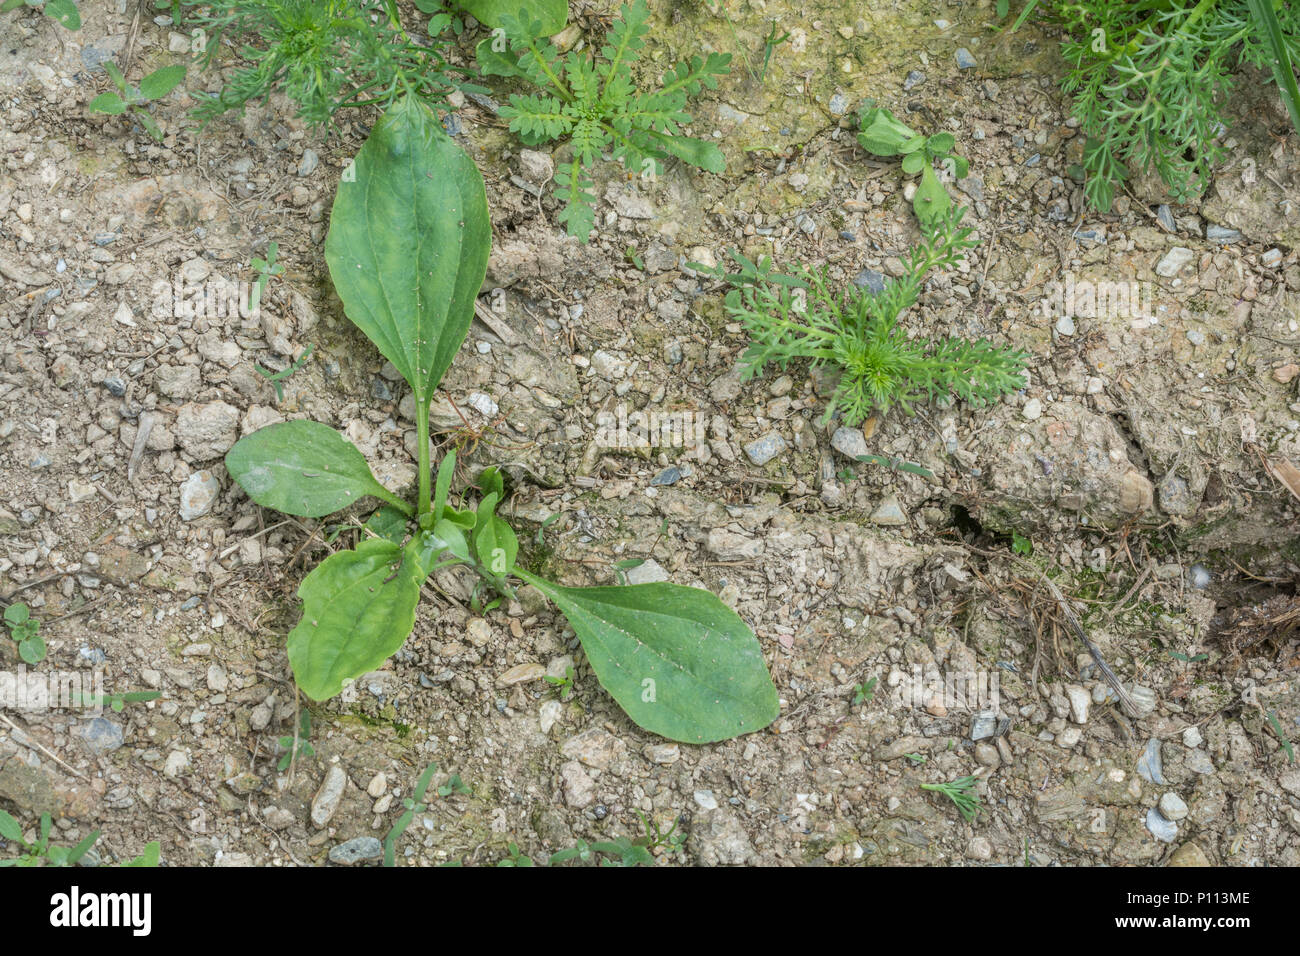 Greater Plantain / Plantago major plant. Young leaves edible cooked, and also a plant once used in herbal medicine. Weeds sprouting. Stock Photo